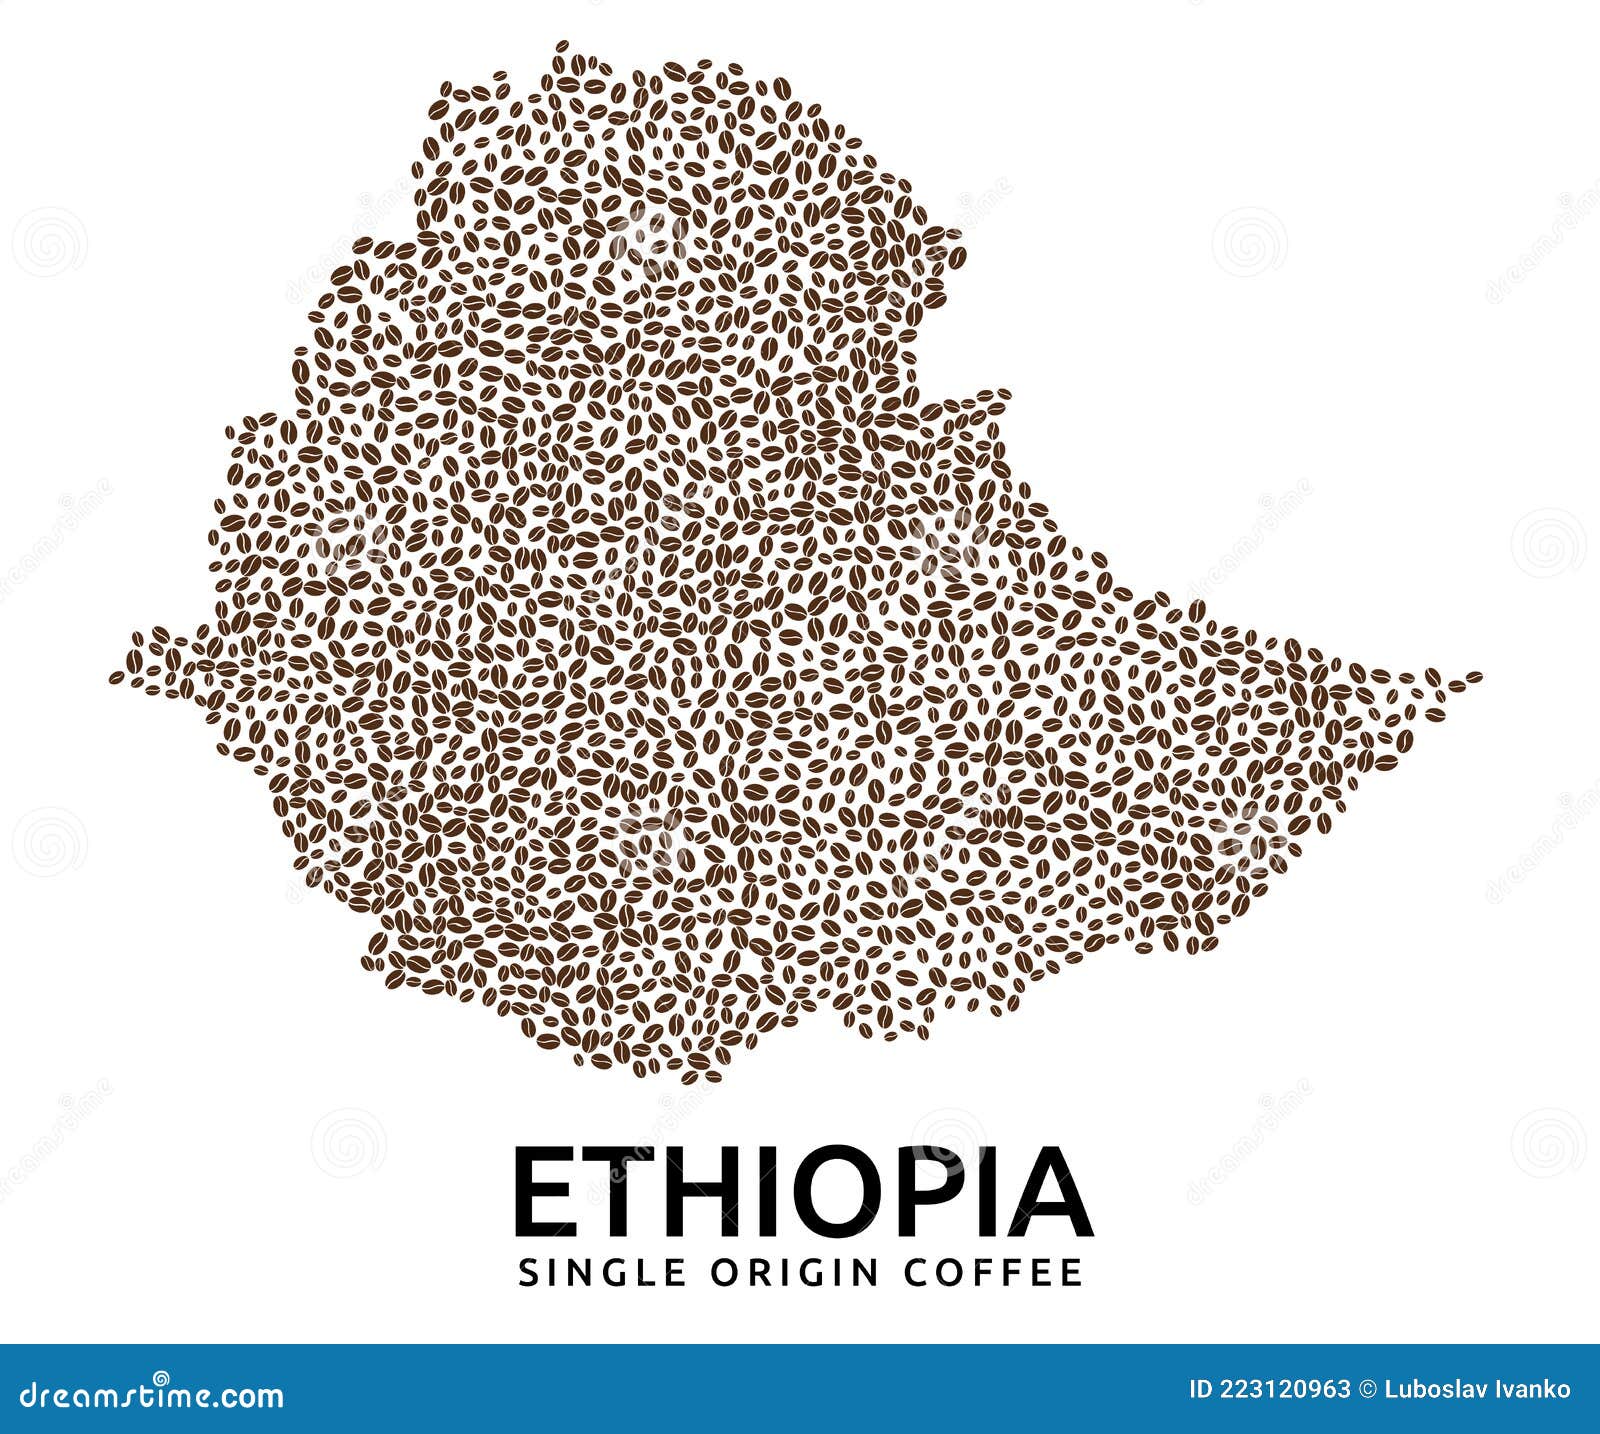 https://thumbs.dreamstime.com/z/shape-ethiopia-map-made-scattered-coffee-beans-country-name-below-223120963.jpg